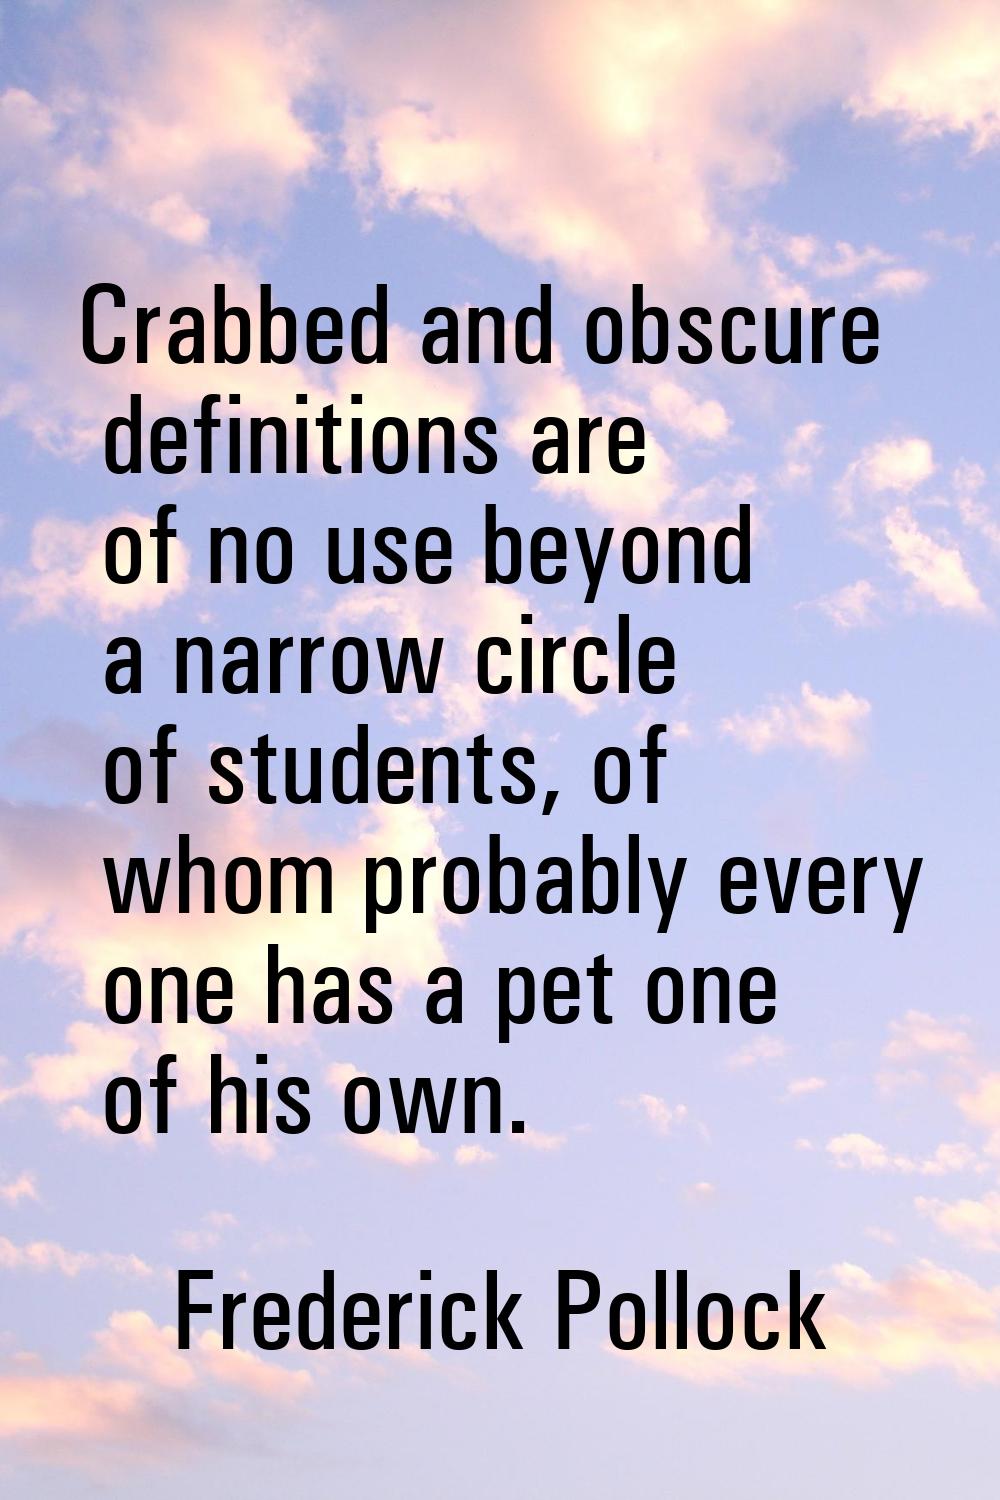 Crabbed and obscure definitions are of no use beyond a narrow circle of students, of whom probably 